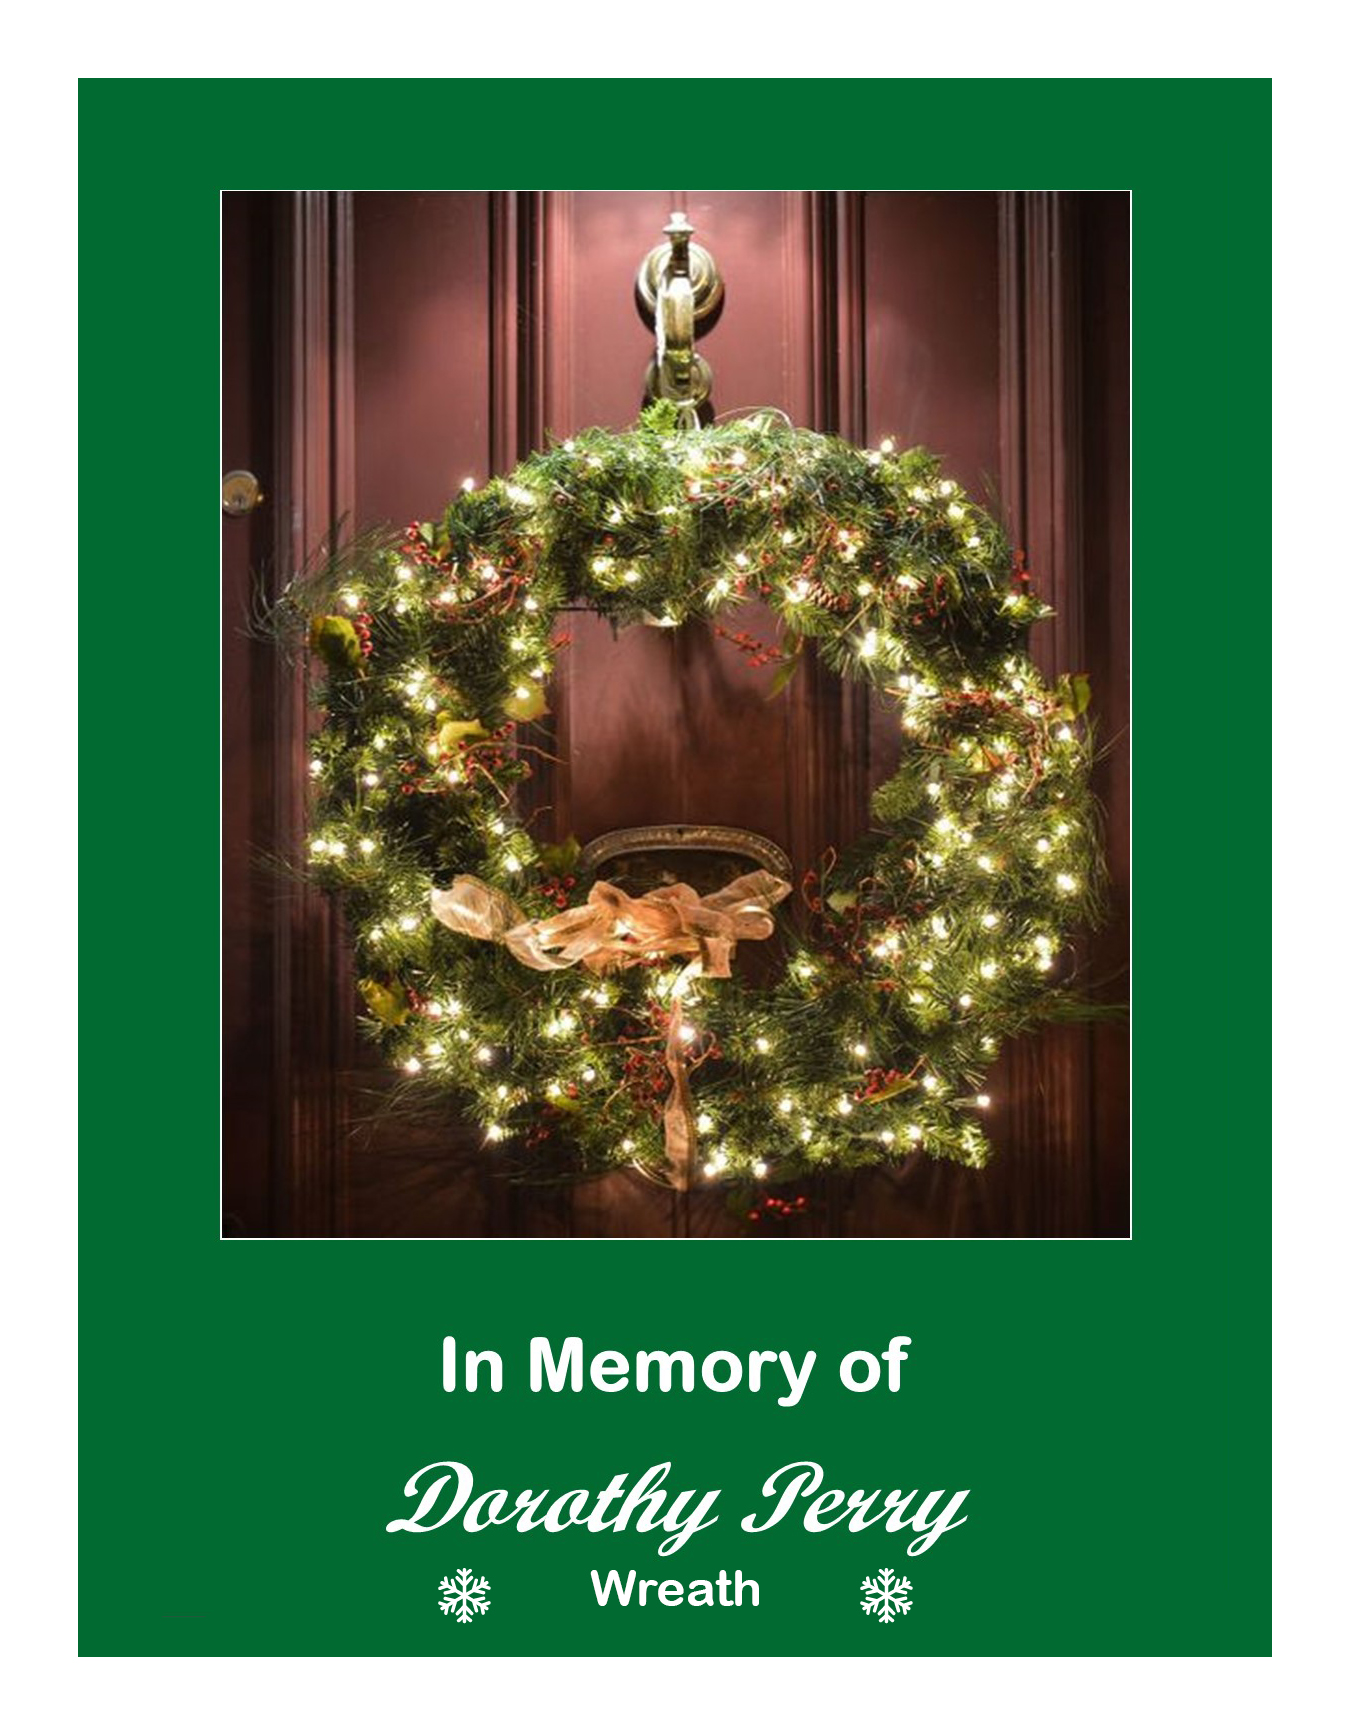 Wreath in memory of Dorothy Perry